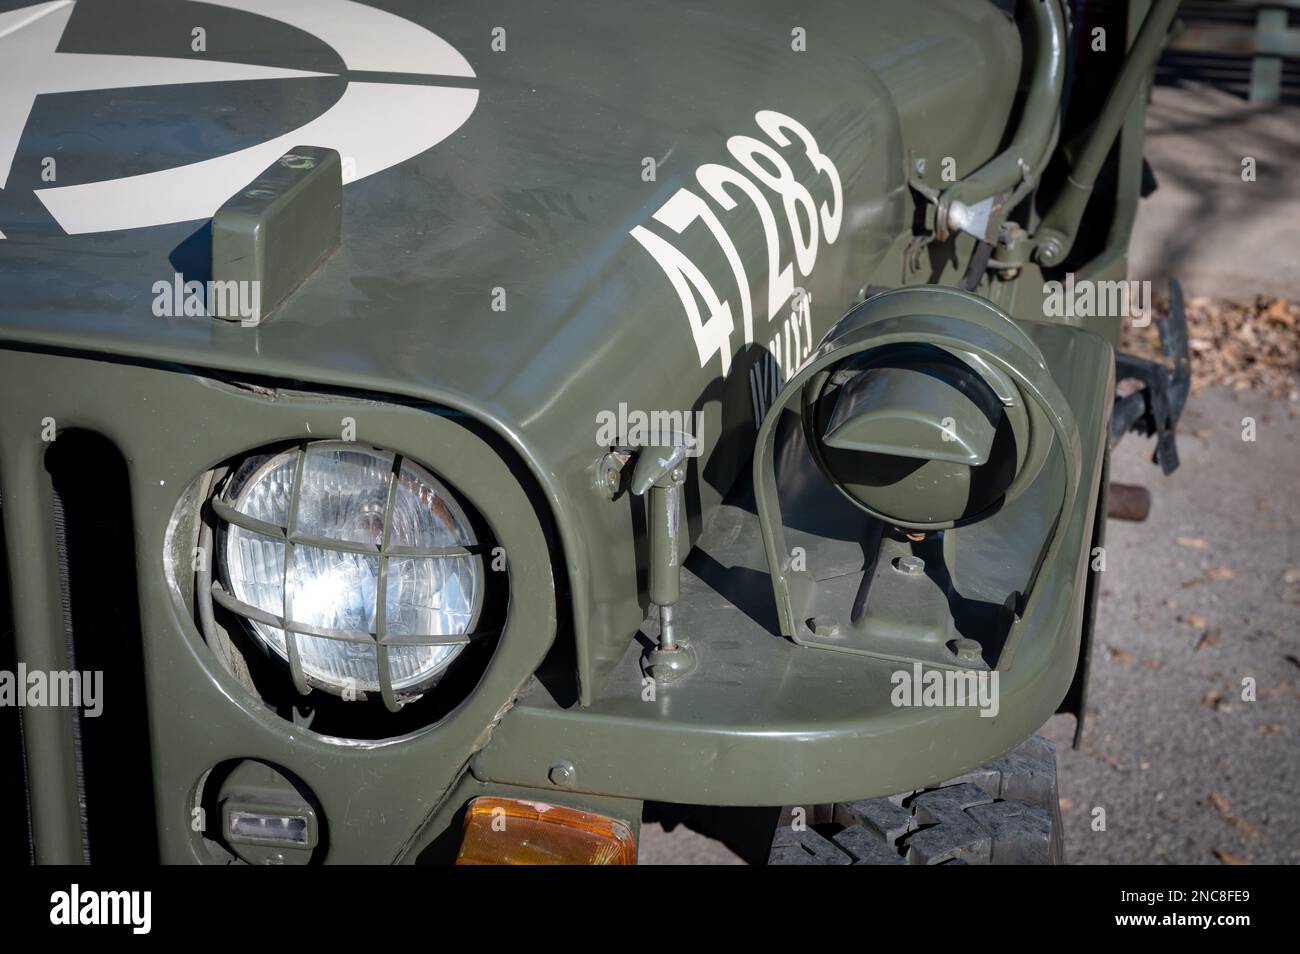 https://c8.alamy.com/comp/2NC8FE9/blackout-lights-detail-of-an-old-green-jeep-willys-military-suv-2NC8FE9.jpg